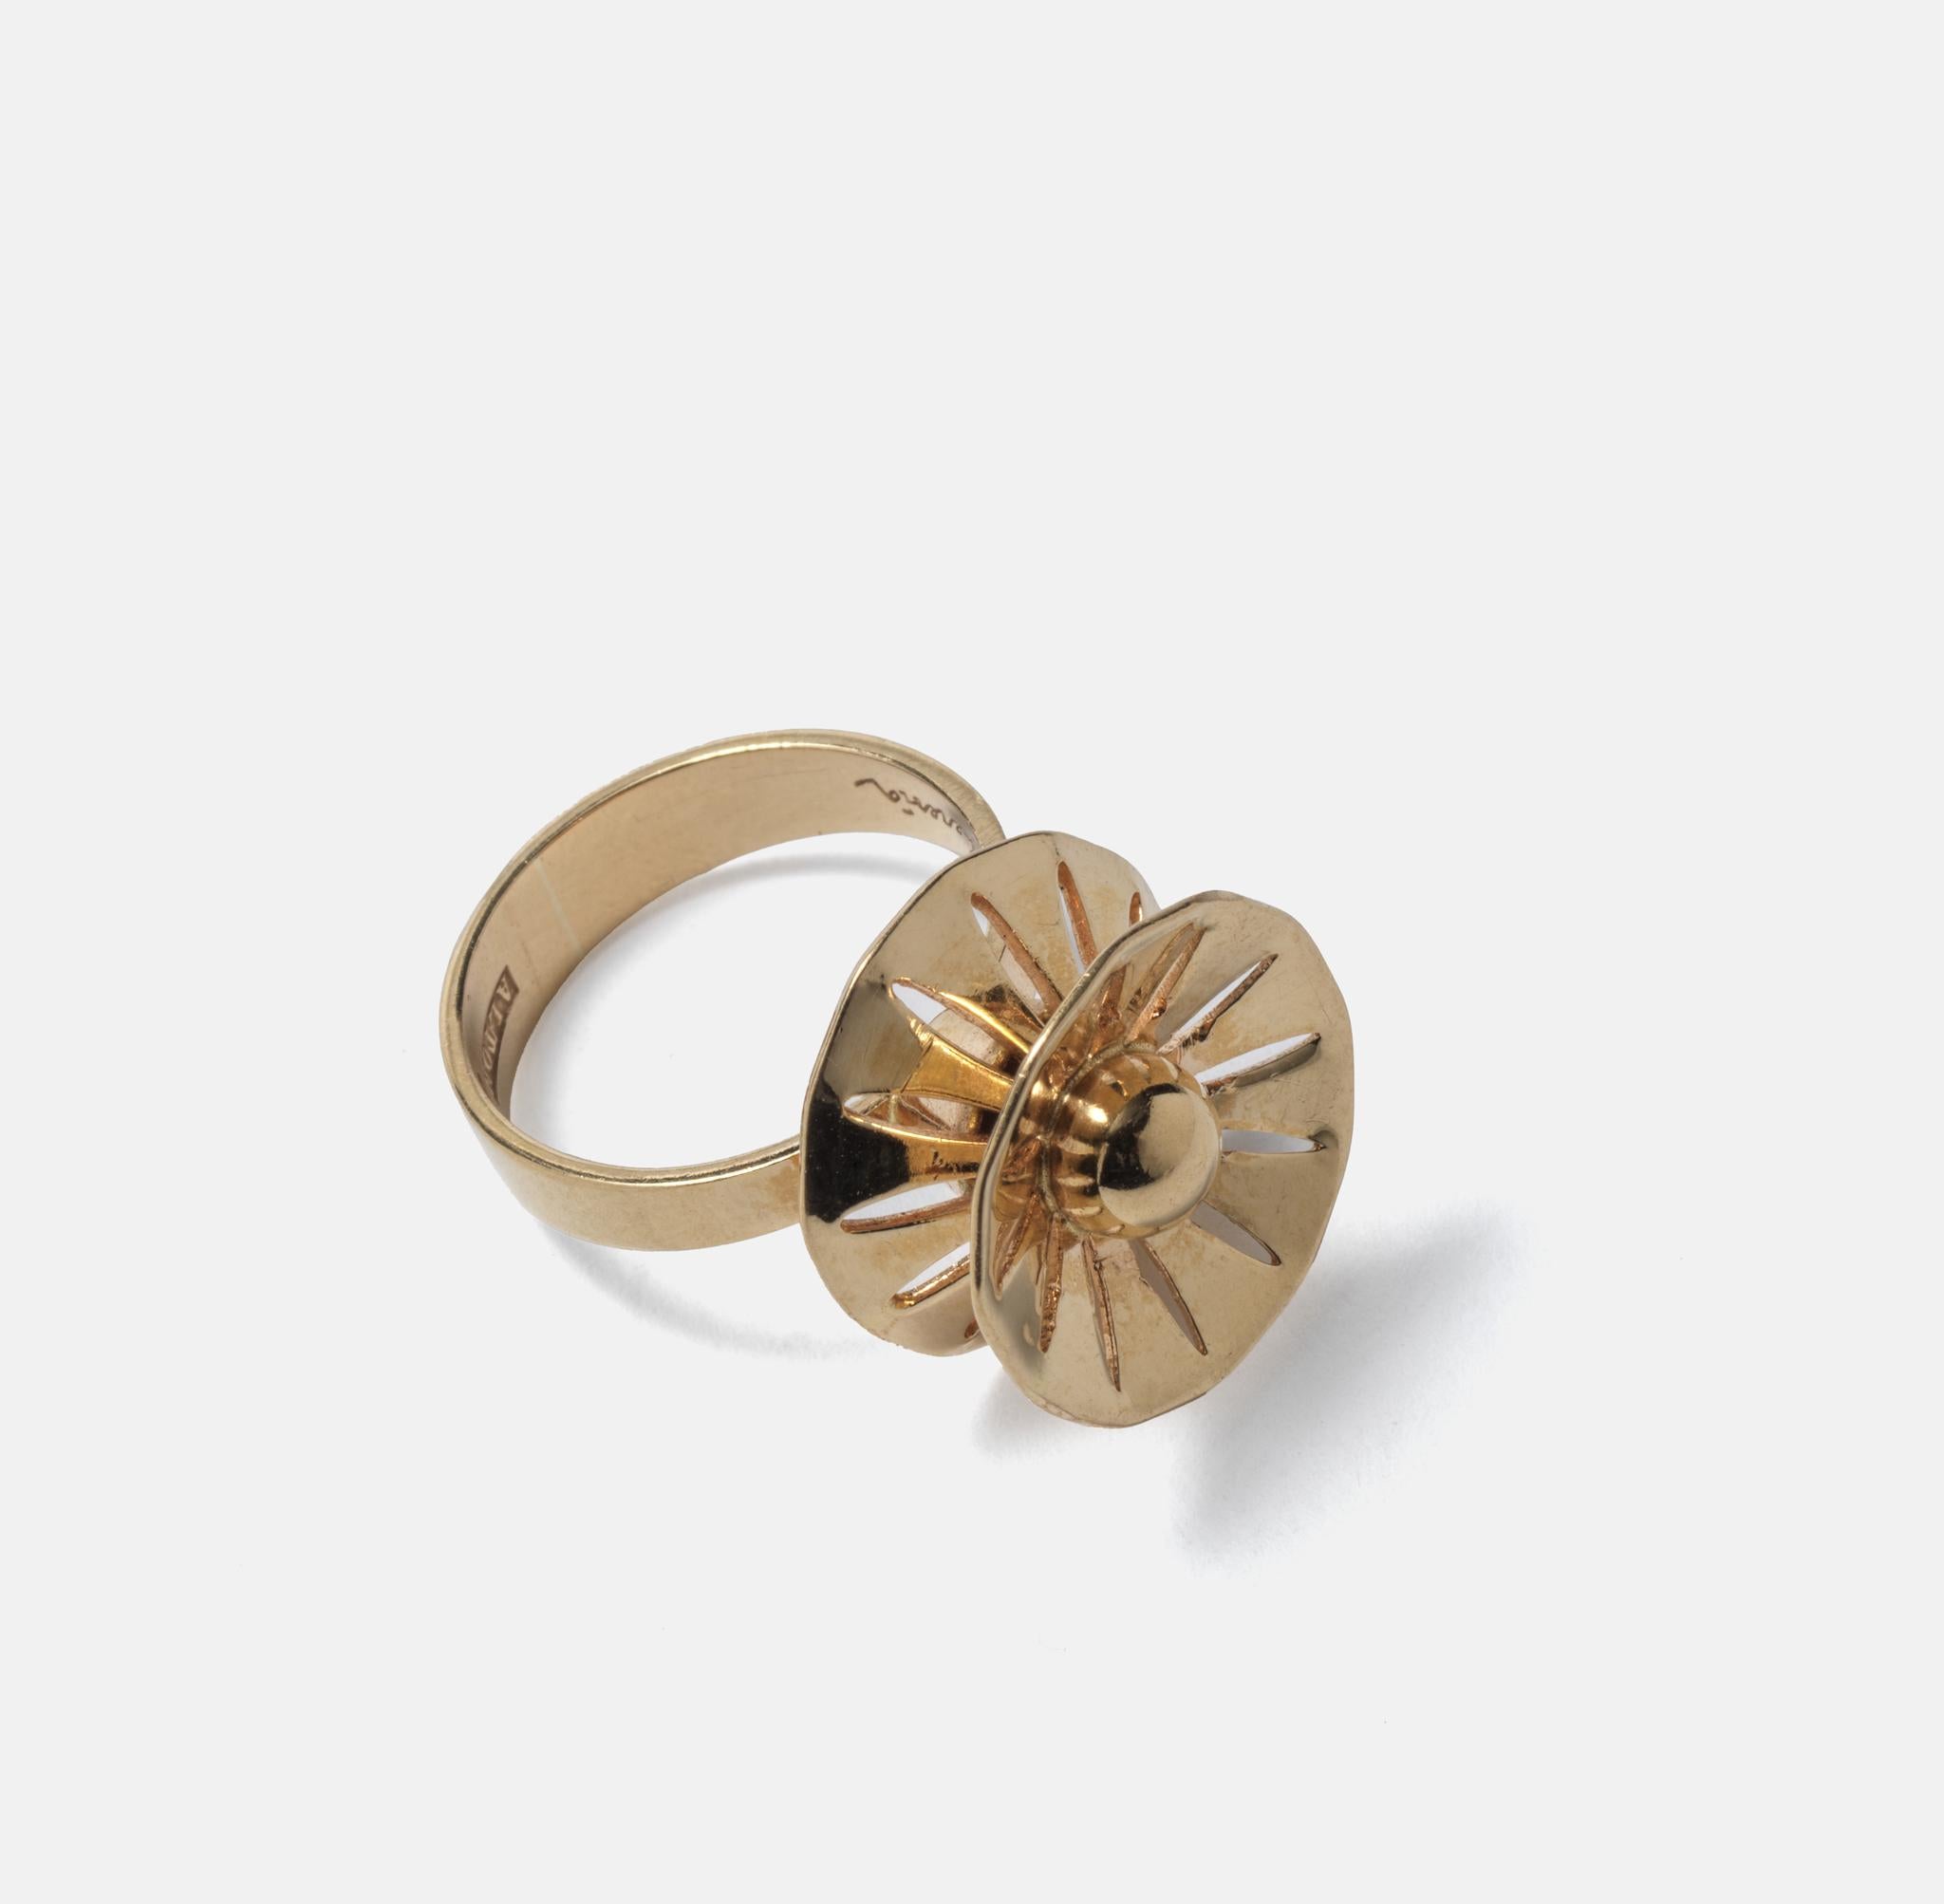 A flower? this ring is small and light with a flowerlike design. So typical of the early 70s. Theresia Hvorslev (1935-) was a Swedish jewelry designer that started to design and make jewelry already as a teenager. During her career she designed